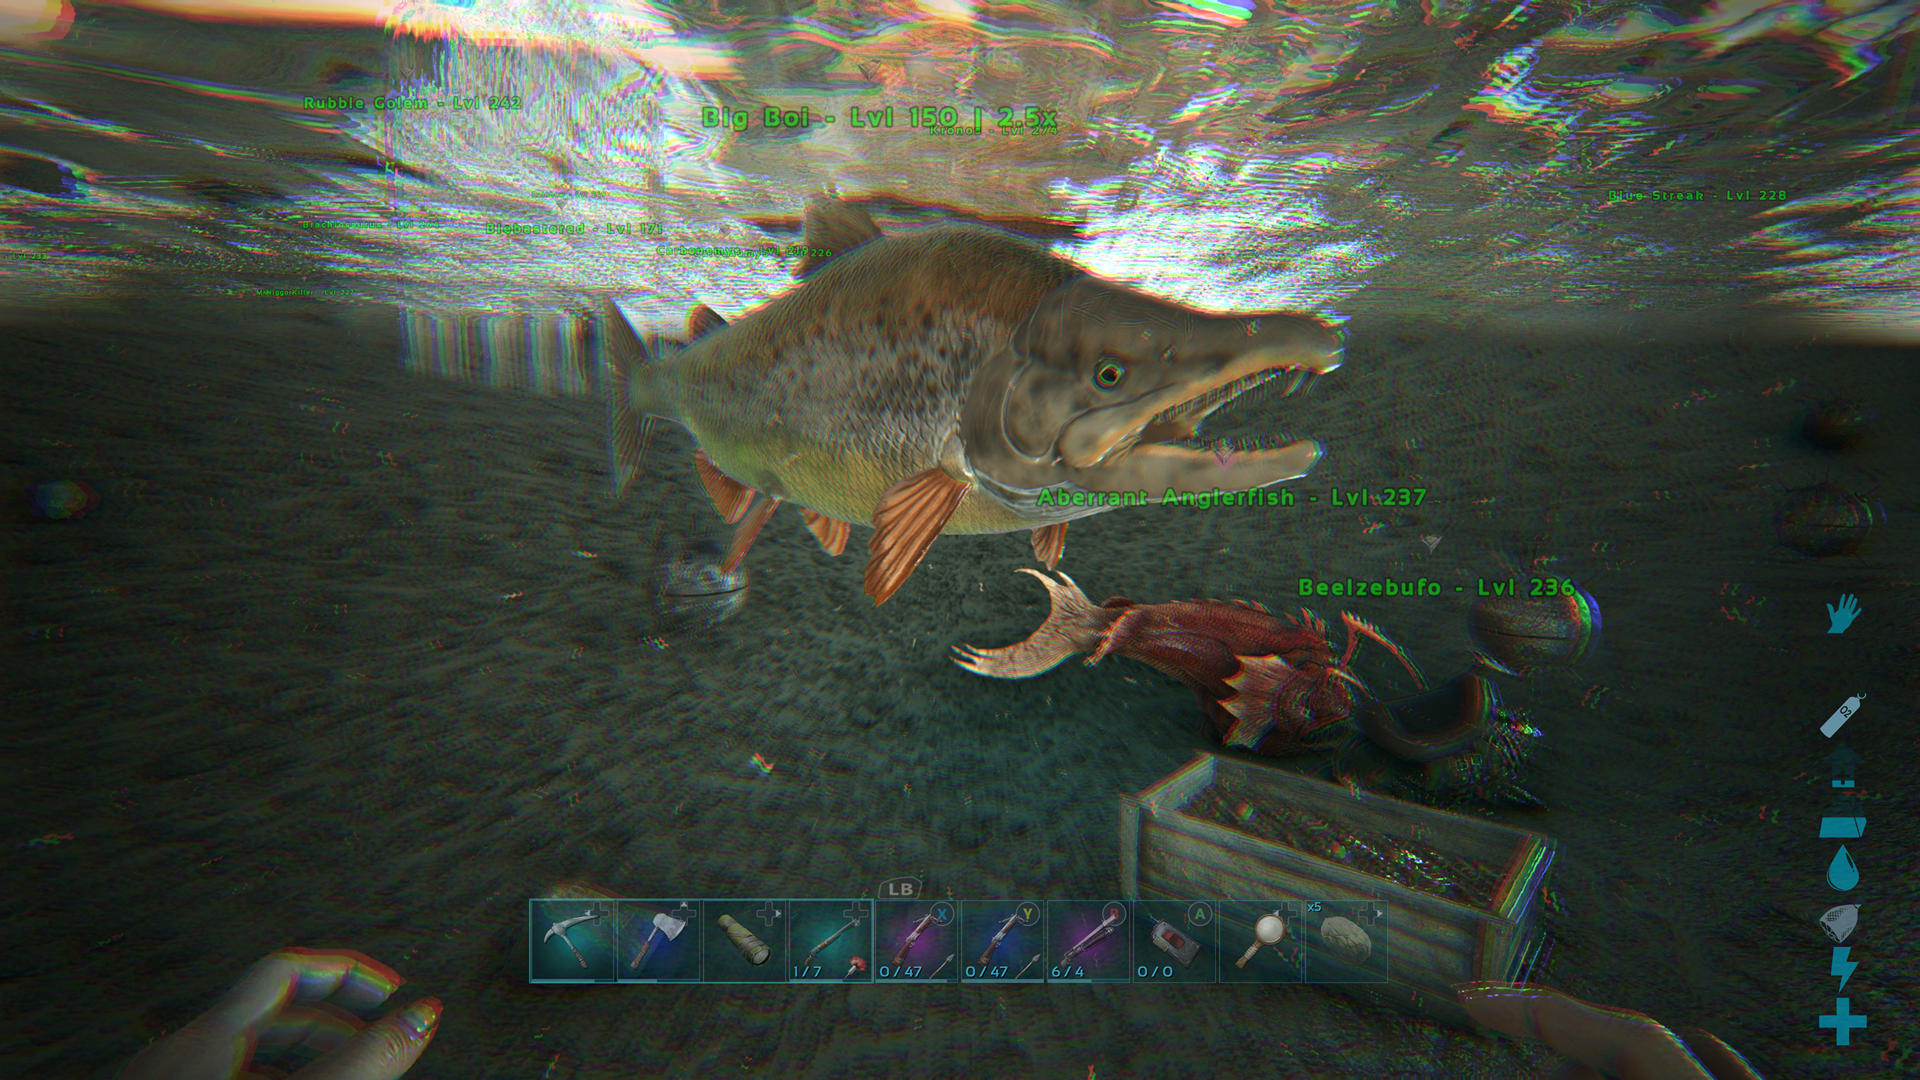 I wanted to share my giant sabertooth salmon i found and tamed rark